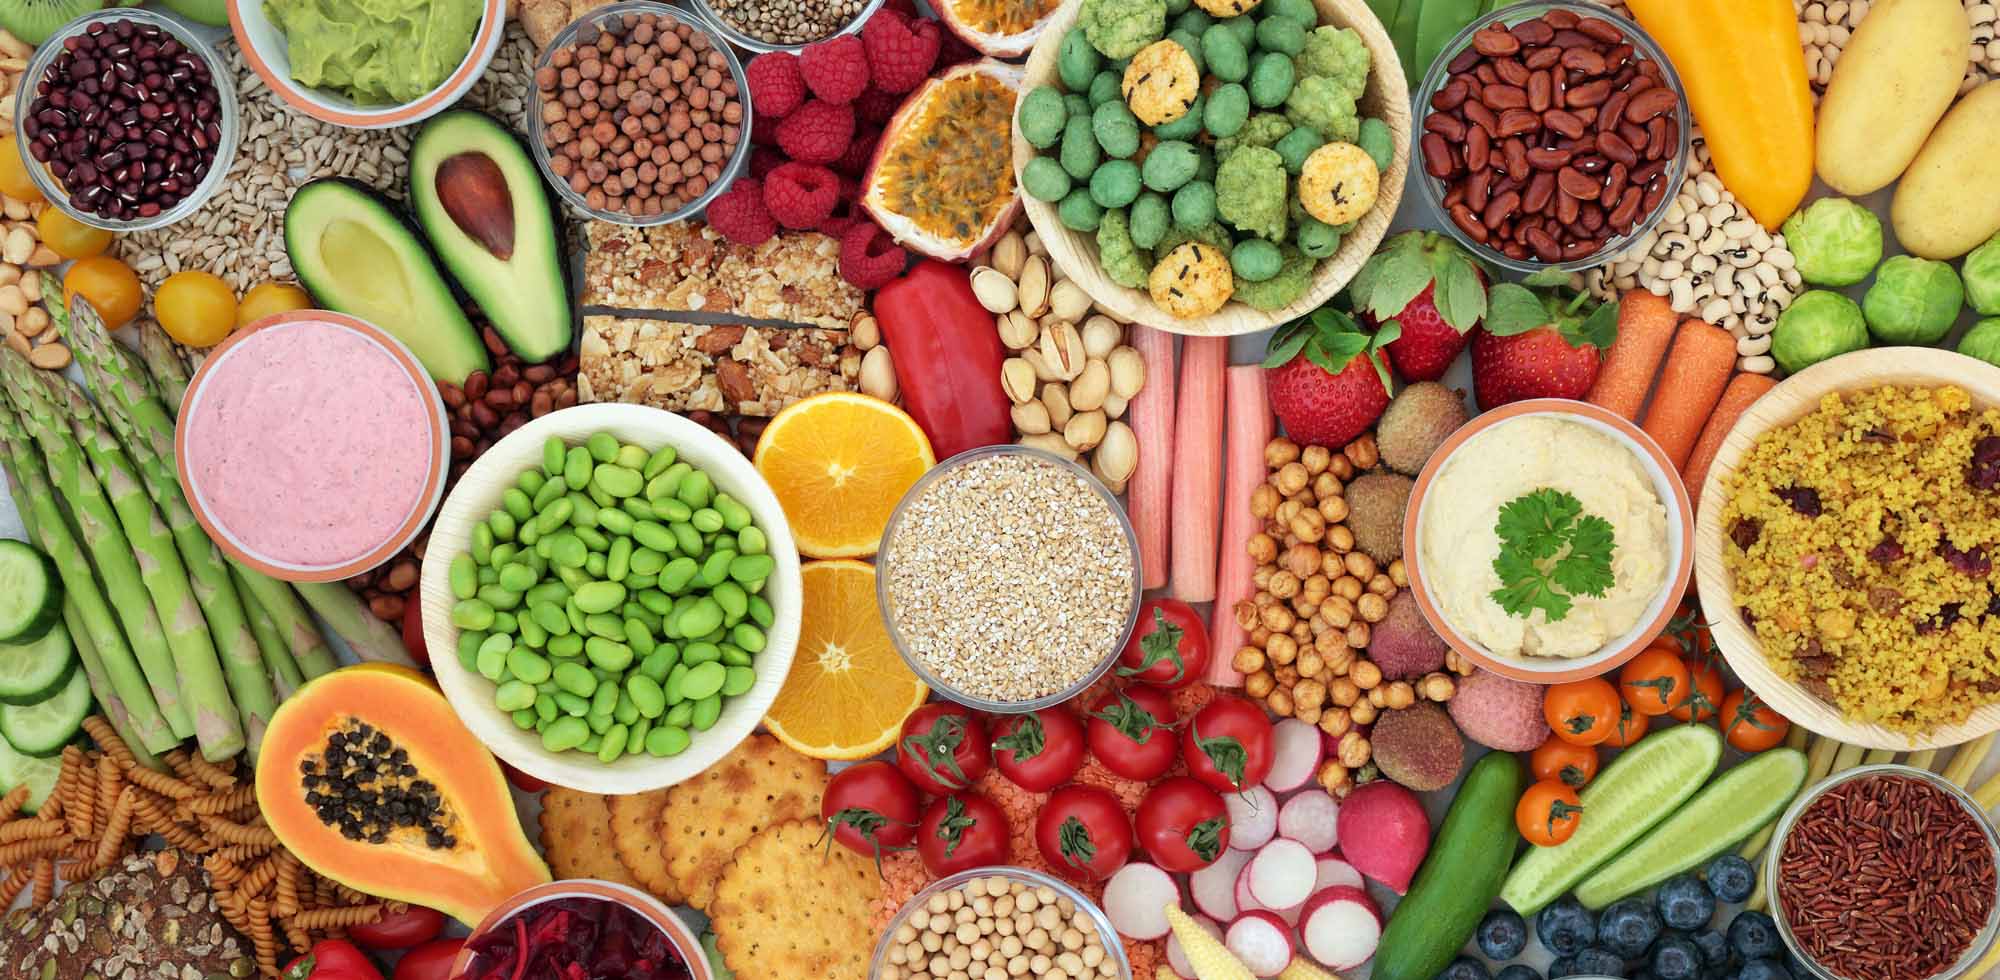 Mixed raw vegetables, fruits, nuts, seeds, and legumes for a healthy and balanced vegan diet